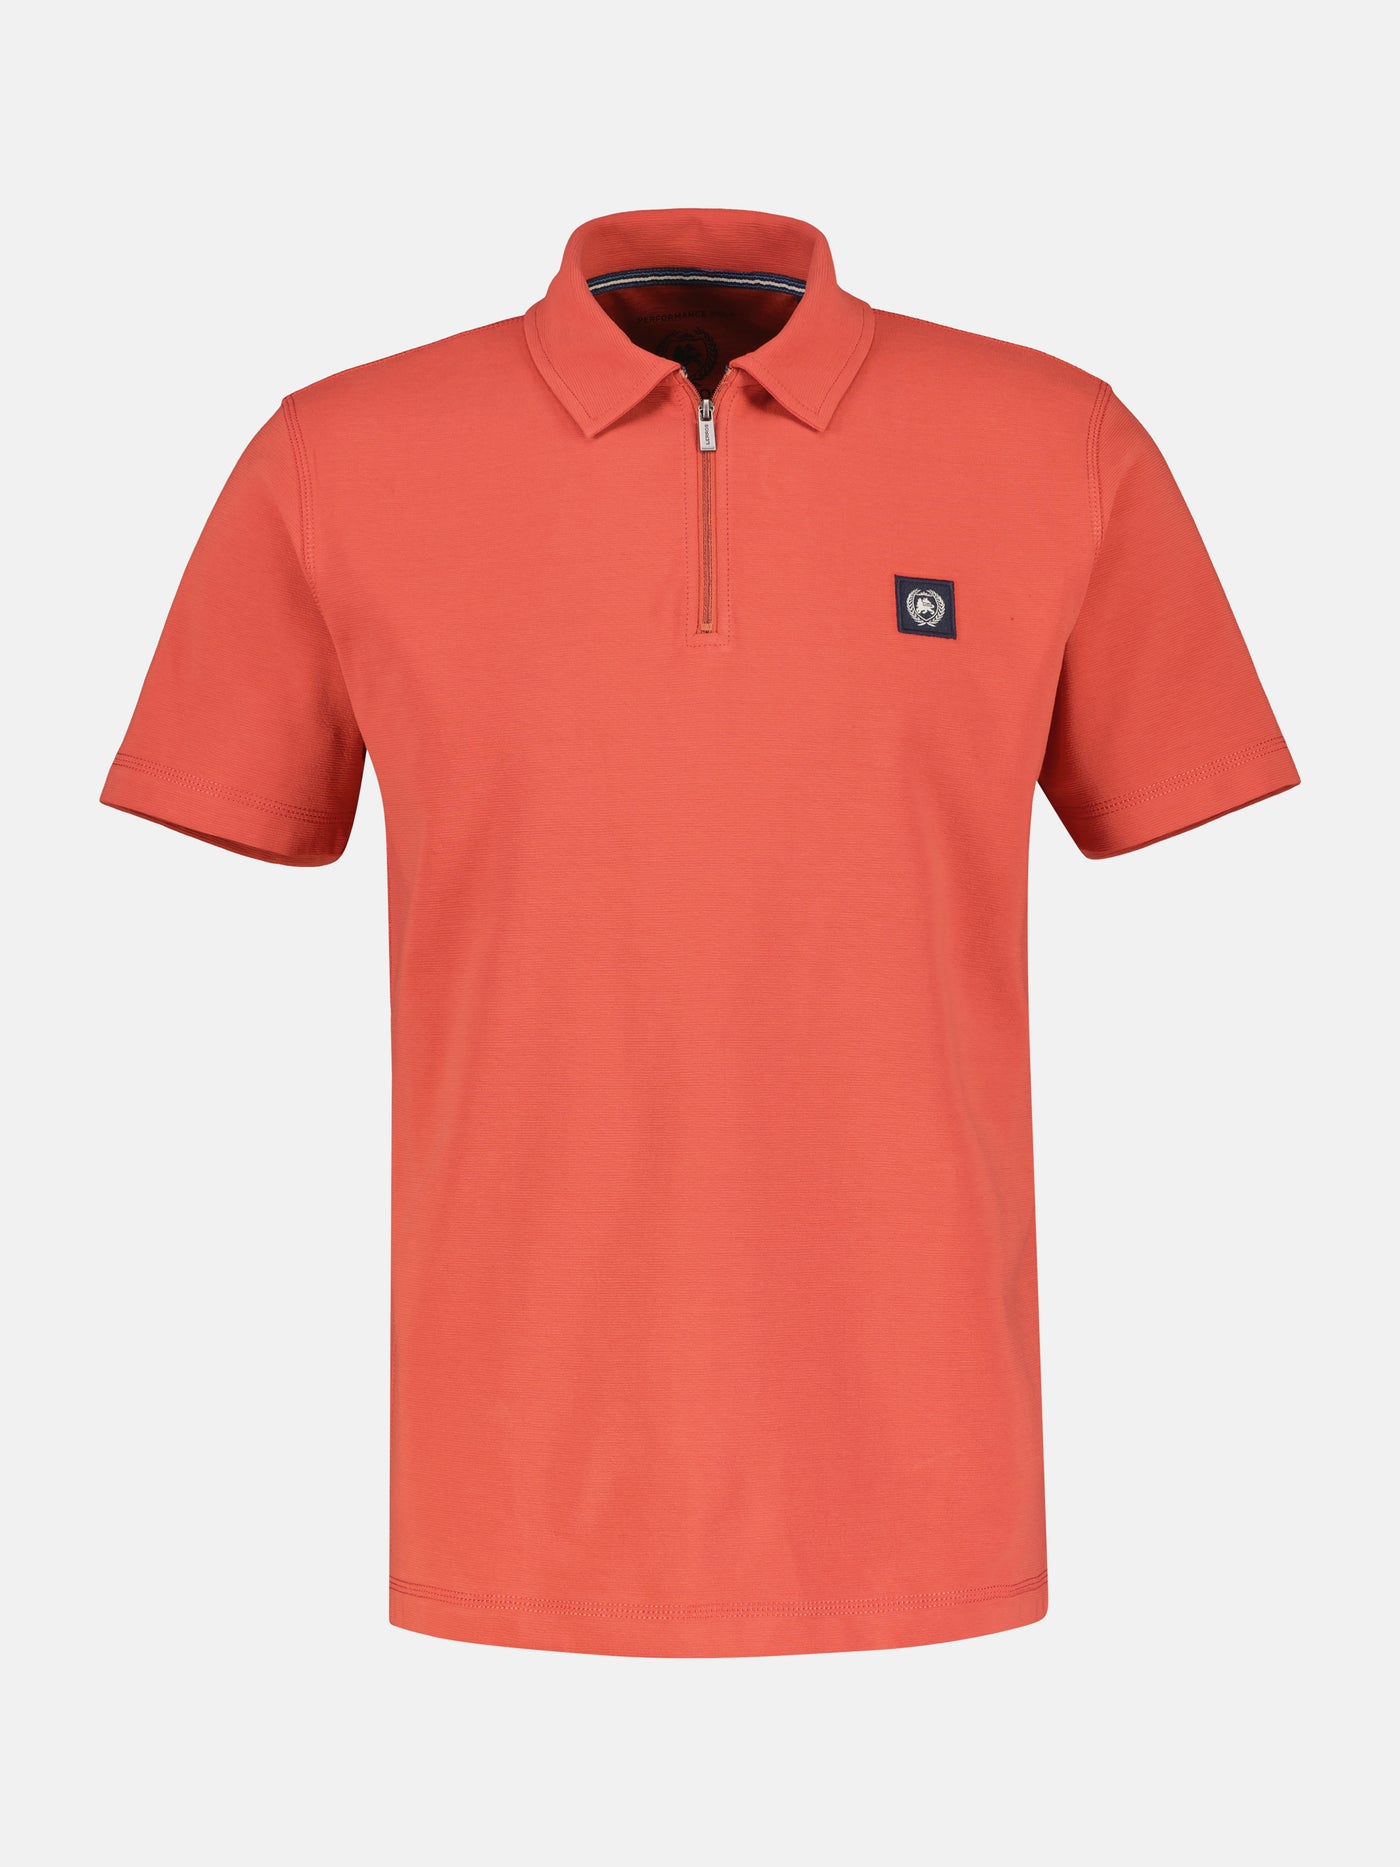 Polo shirt in Cool &amp; Dry quality, with zip collar